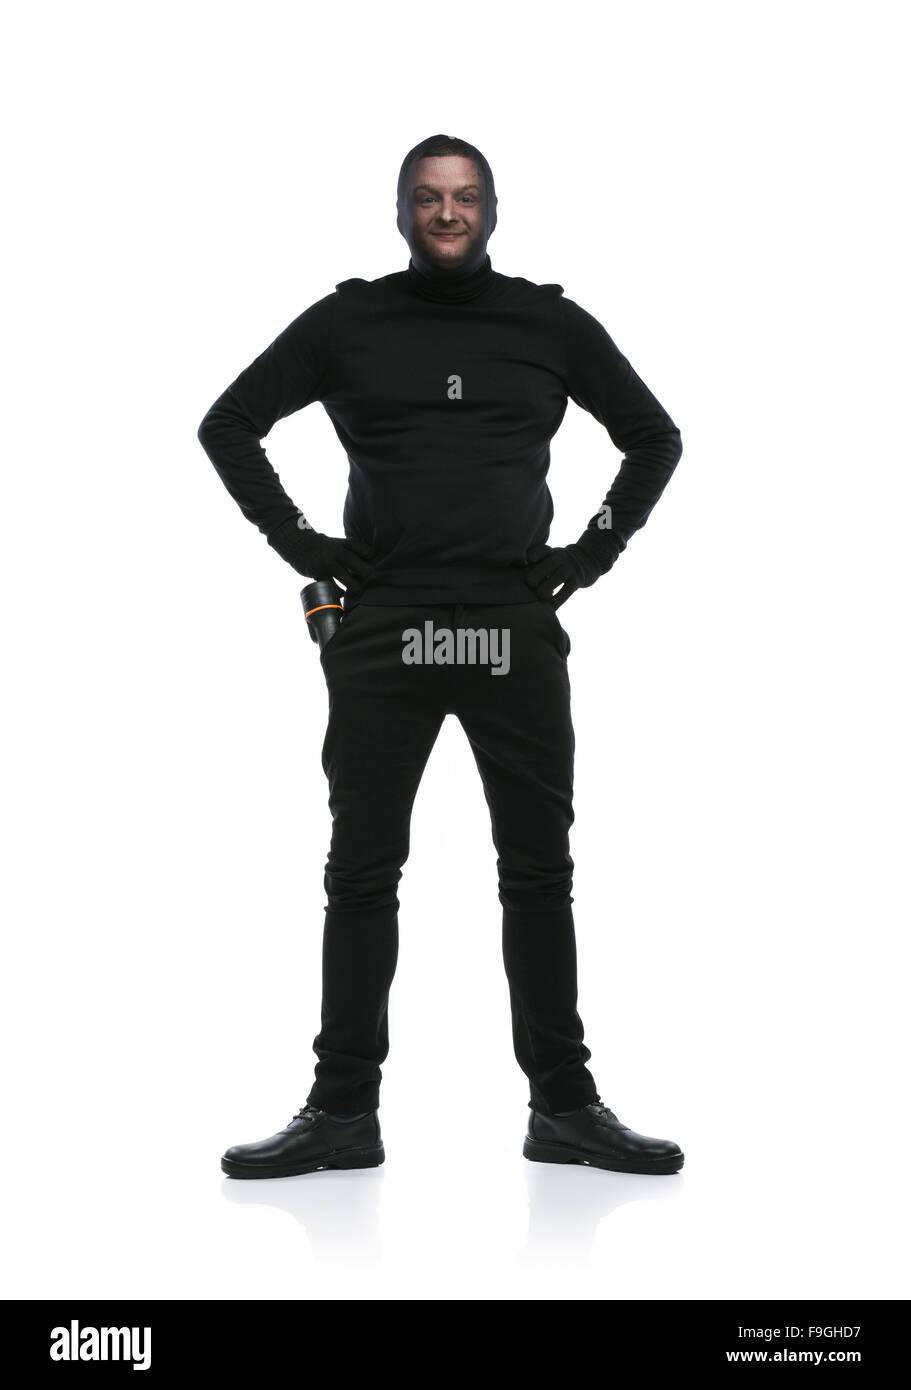 Thief in action with balaclava on his face, dressed in black. Studio shot on white background. Stock Photo